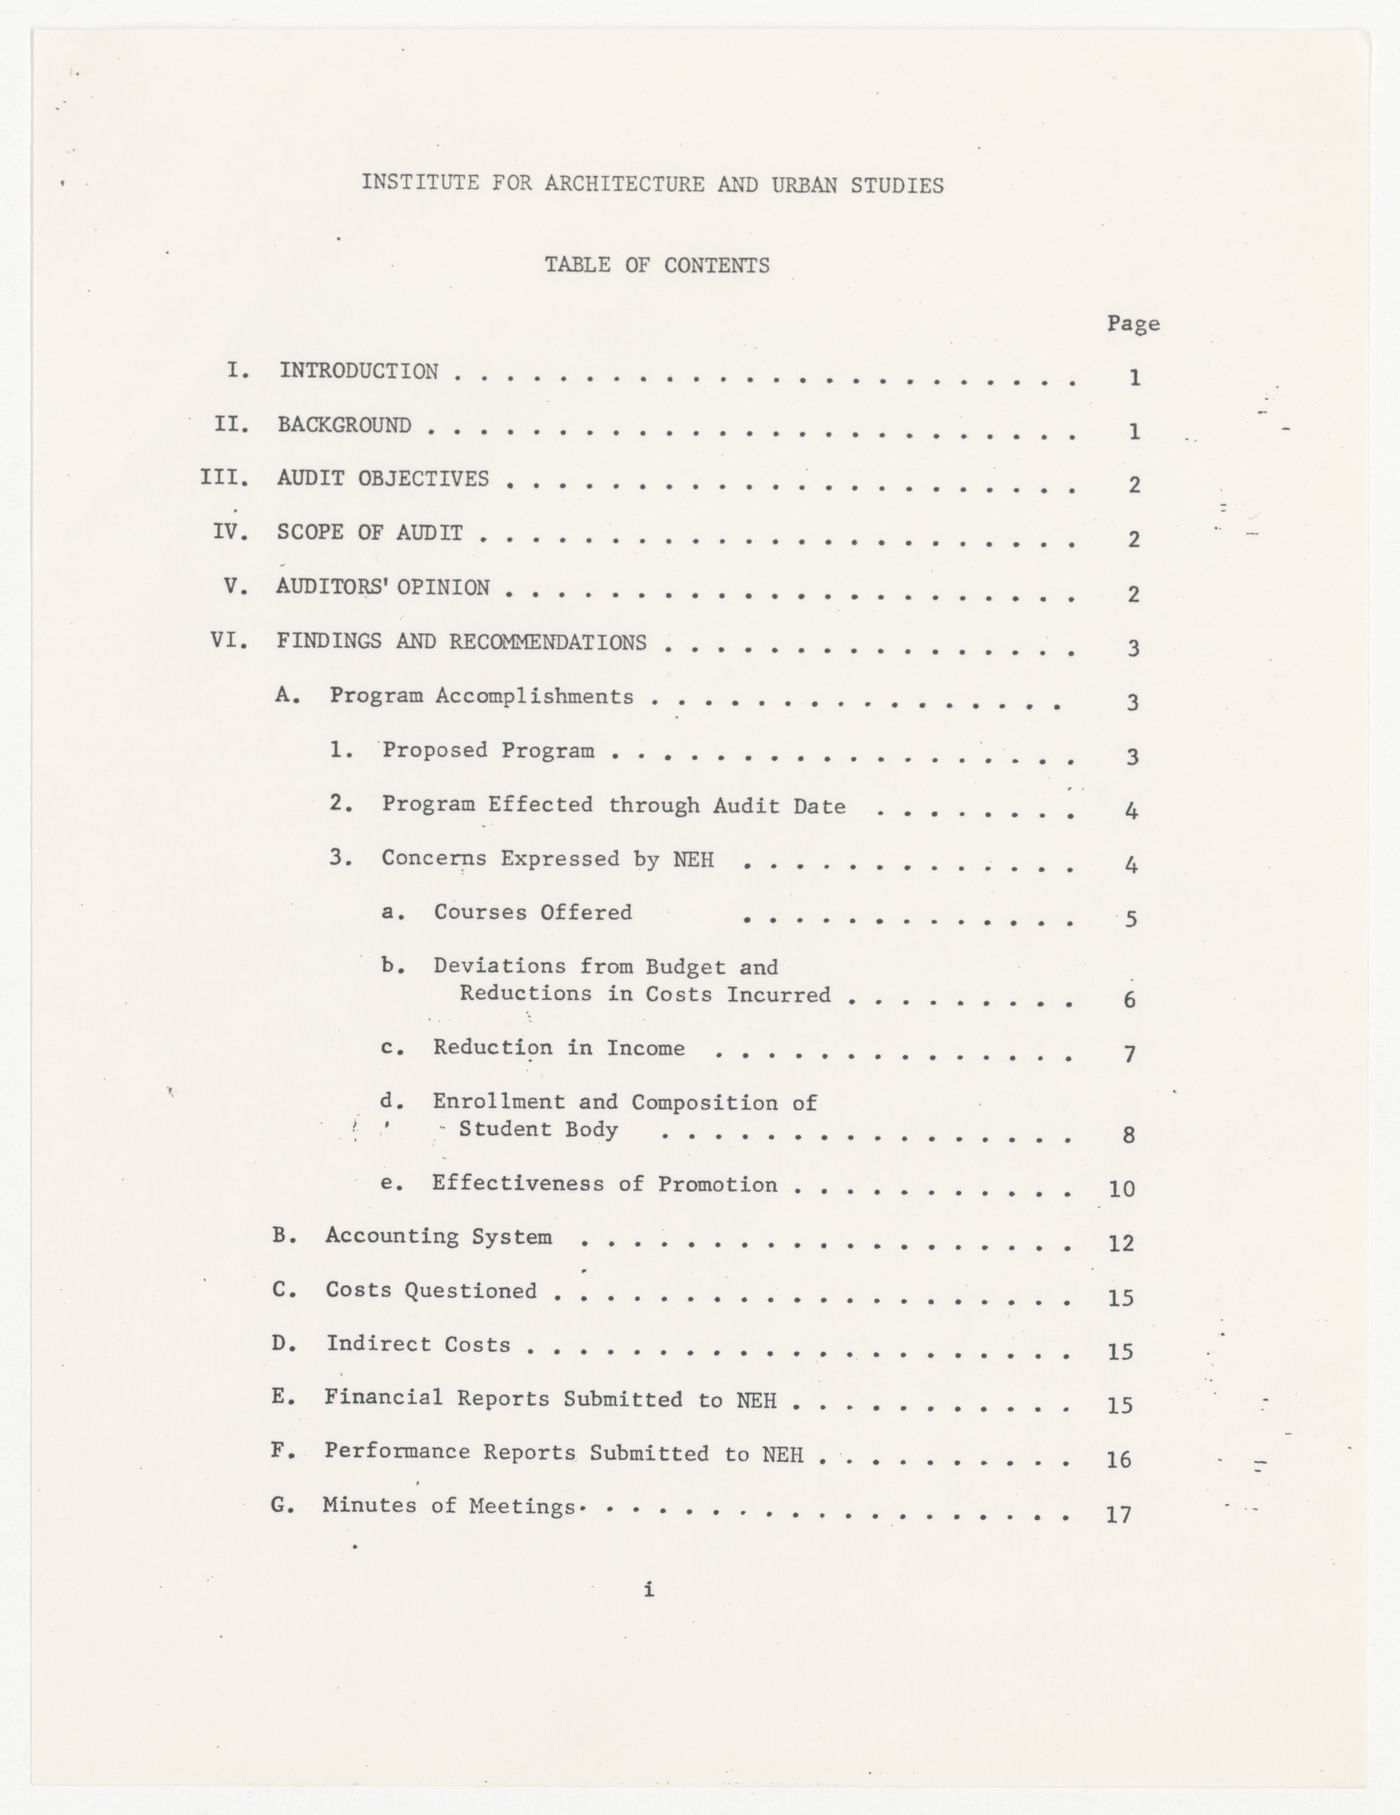 Letter from Arthur D. Schwarz to Hamid R. Nouri with attached audit of IAUS compliance with accounting and reporting requirements for National Endowment for the Humanities (NEH) grants dated June 4th, 1980